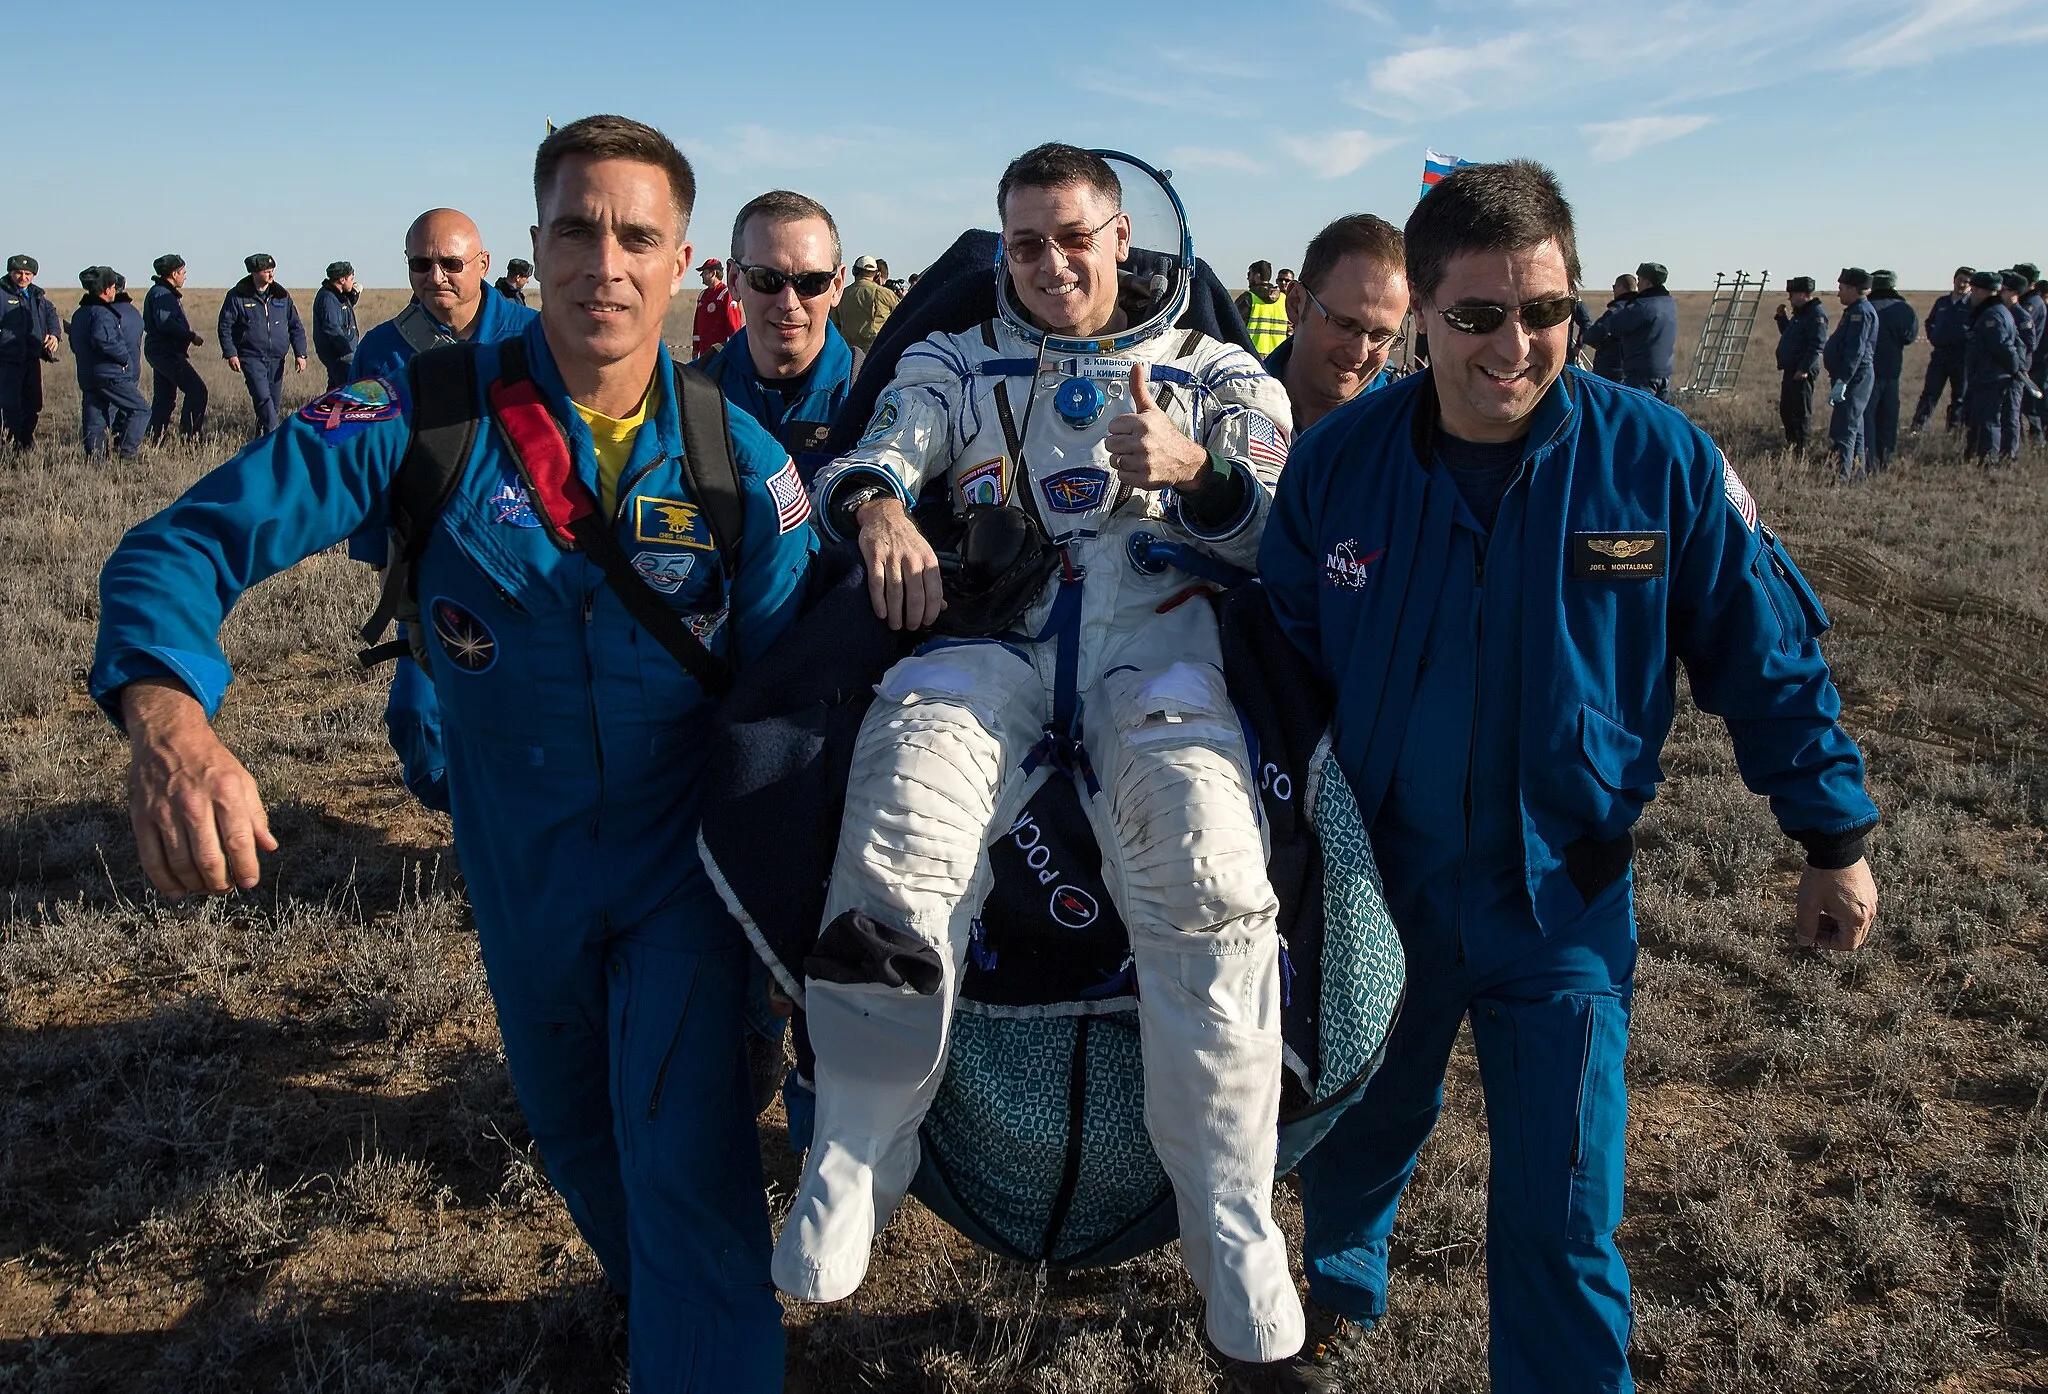 Photo showing: NASA astronaut Shane Kimbrough is carried into a medical tent shortly after he, Russian cosmonaut Sergey Ryzhikov of Roscosmos, and Russian cosmonaut Andrey Borisenko of Roscosmos landed in their Soyuz MS-02 spacecraft in a remote area near the town of Zhezkazgan, Kazakhstan on Monday, April 10, 2017 (Kazakh time). Kimbrough, Ryzhikov, and Borisenko are returning after 173 days in space where they served as members of the Expedition 49 and 50 crews onboard the International Space Station.